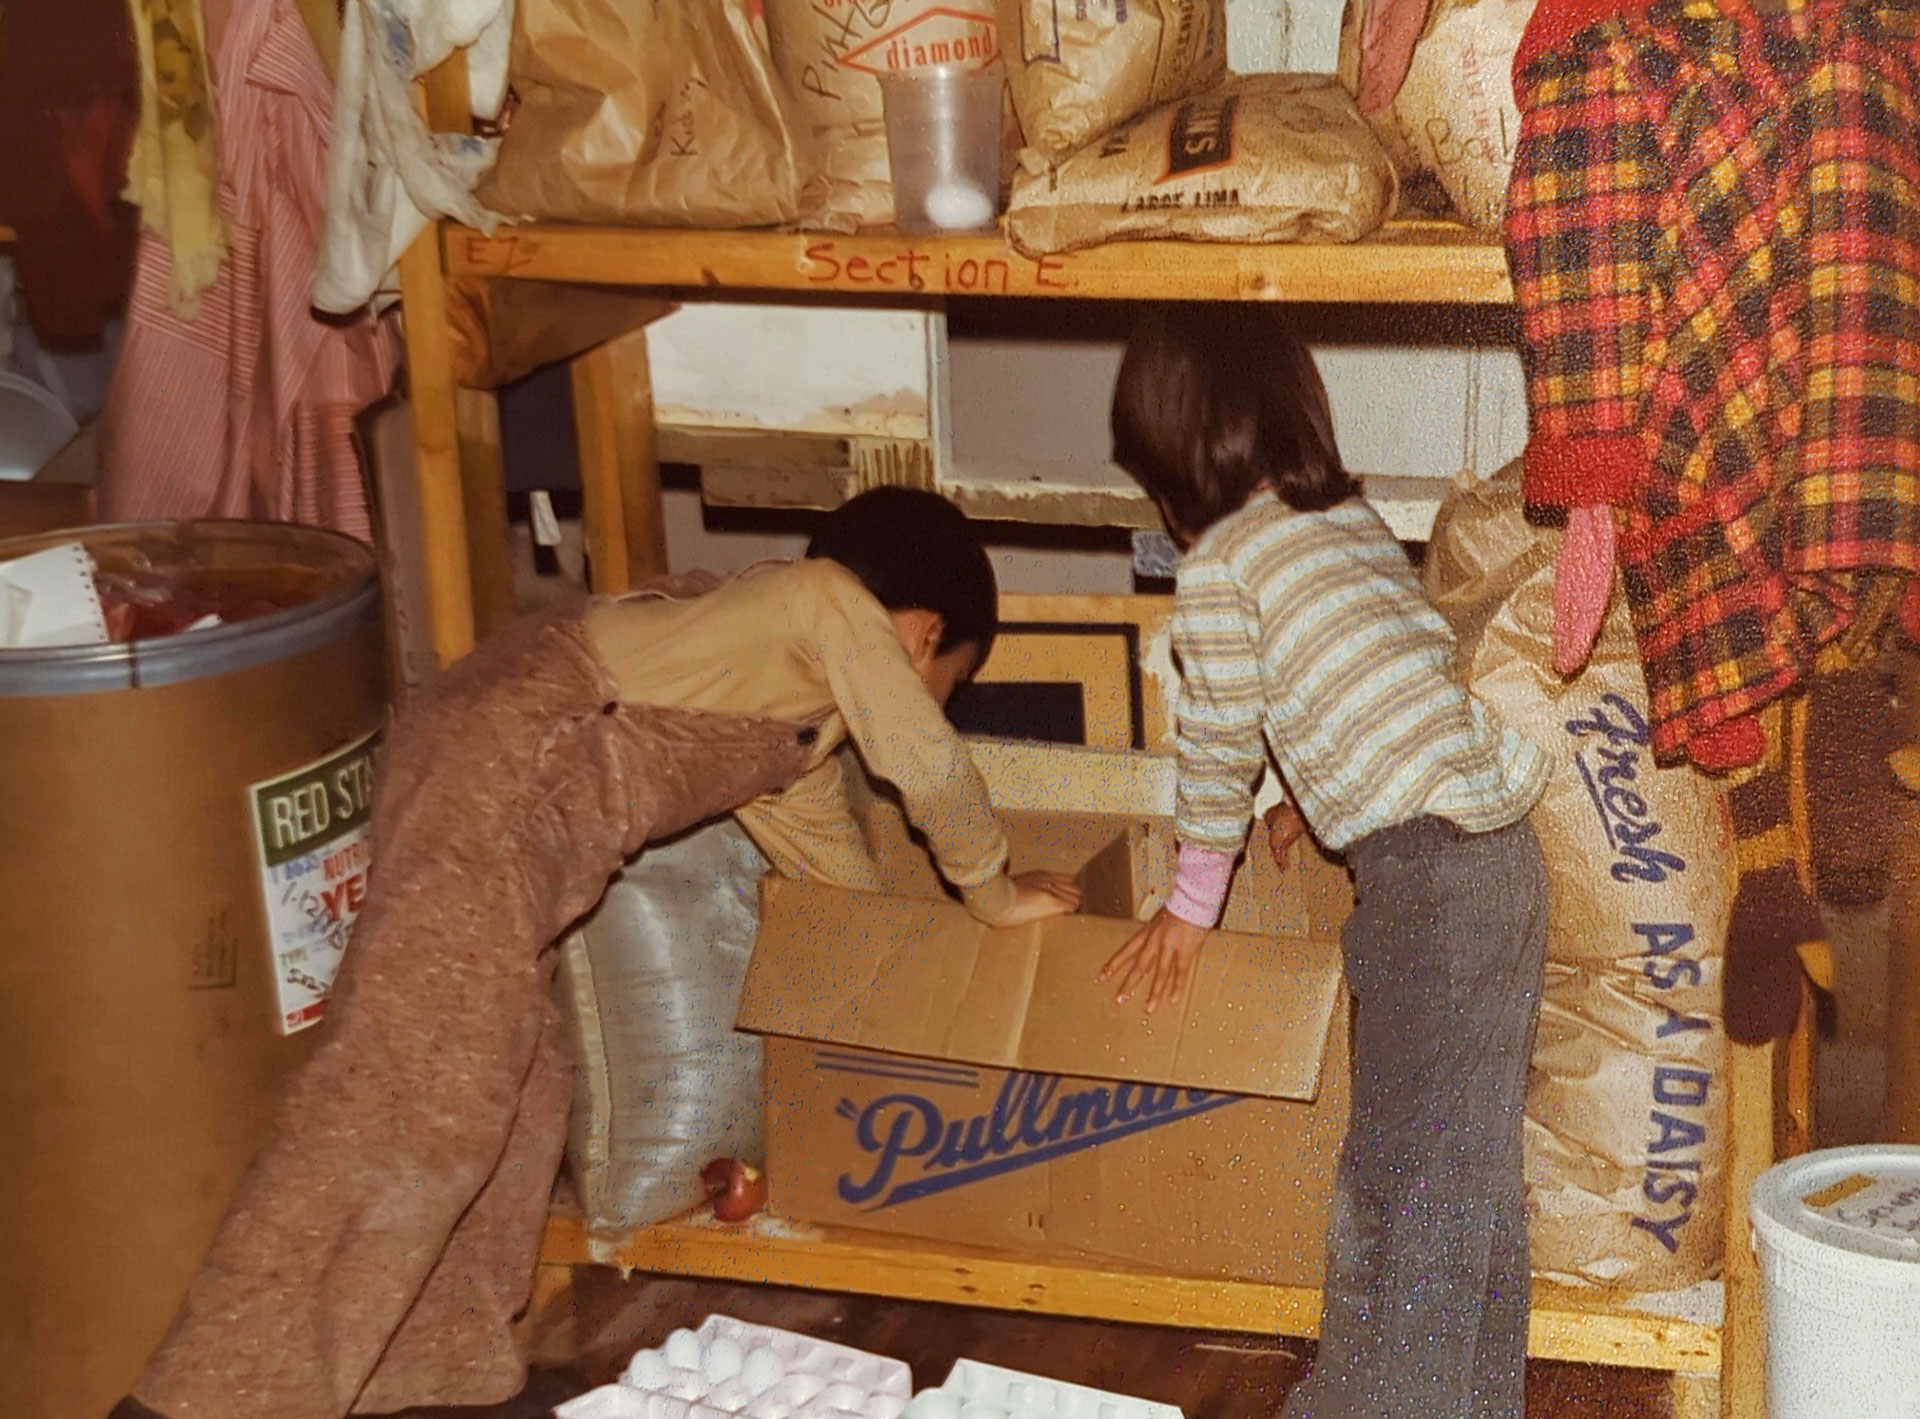 Two children are seen placing items into a cardboard box labeled "Pullman" on a wooden shelf in what appears to be a storage area reminiscent of the Whole Foods Coop Duluth MN. Surrounding them are large sacks of food and supplies. One child is wearing brown overalls and the other a striped sweater.